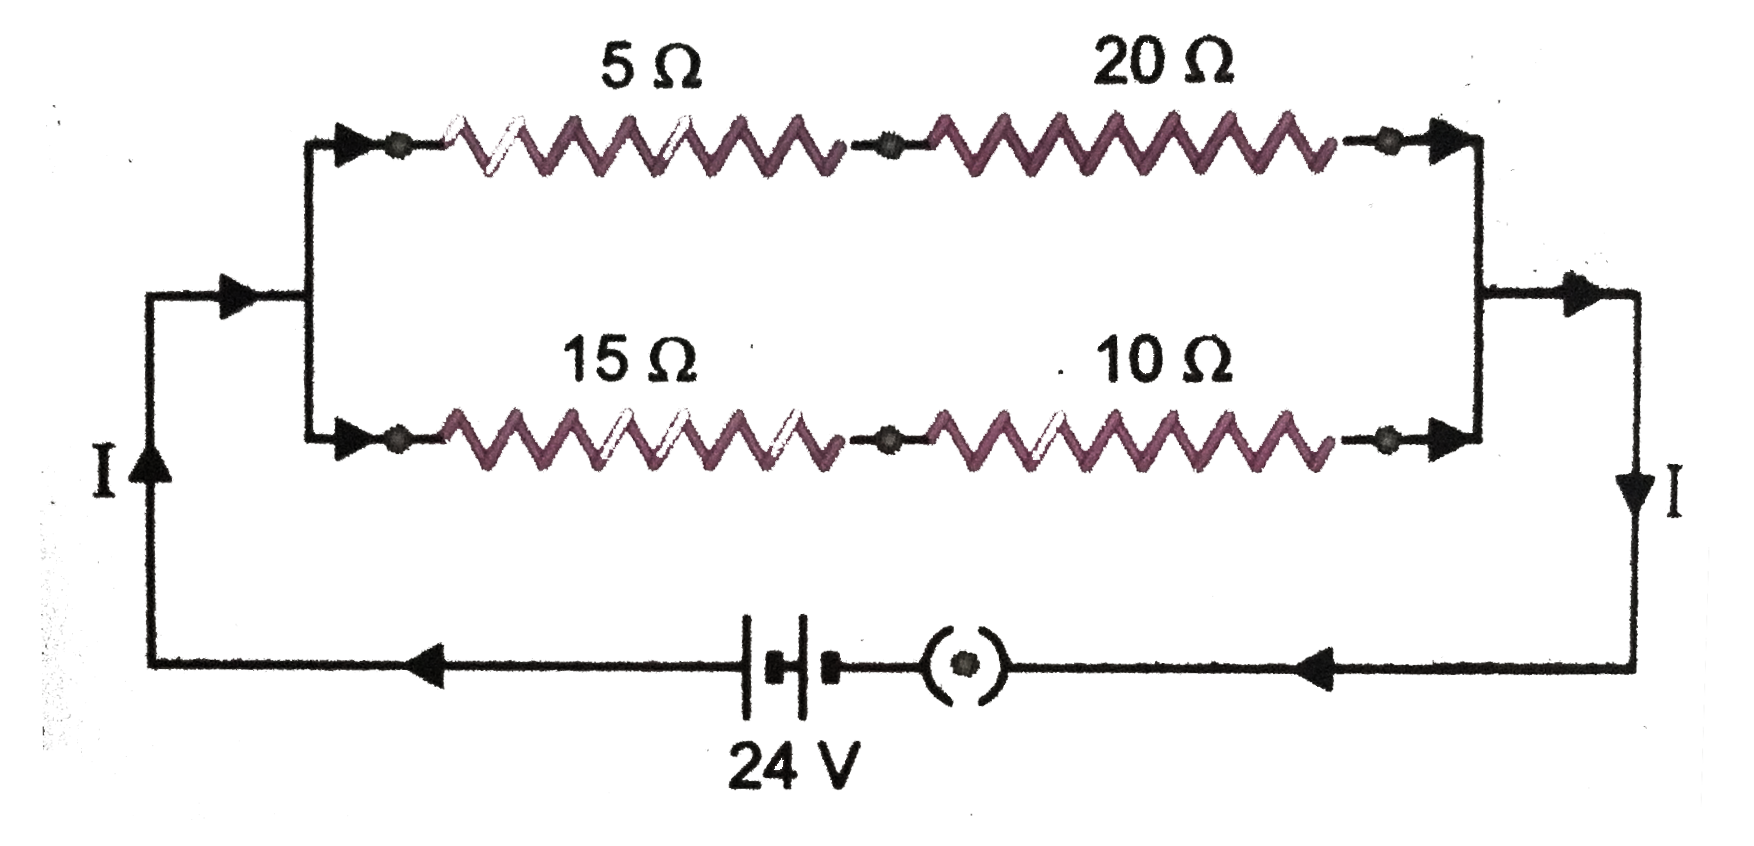 A 24 volt battery is connected to the arrangement of resistances shown in (Fig.) Calculate   (i) the total effective resistance of the circuit,   (ii) the total current flowing in the circuit.   .